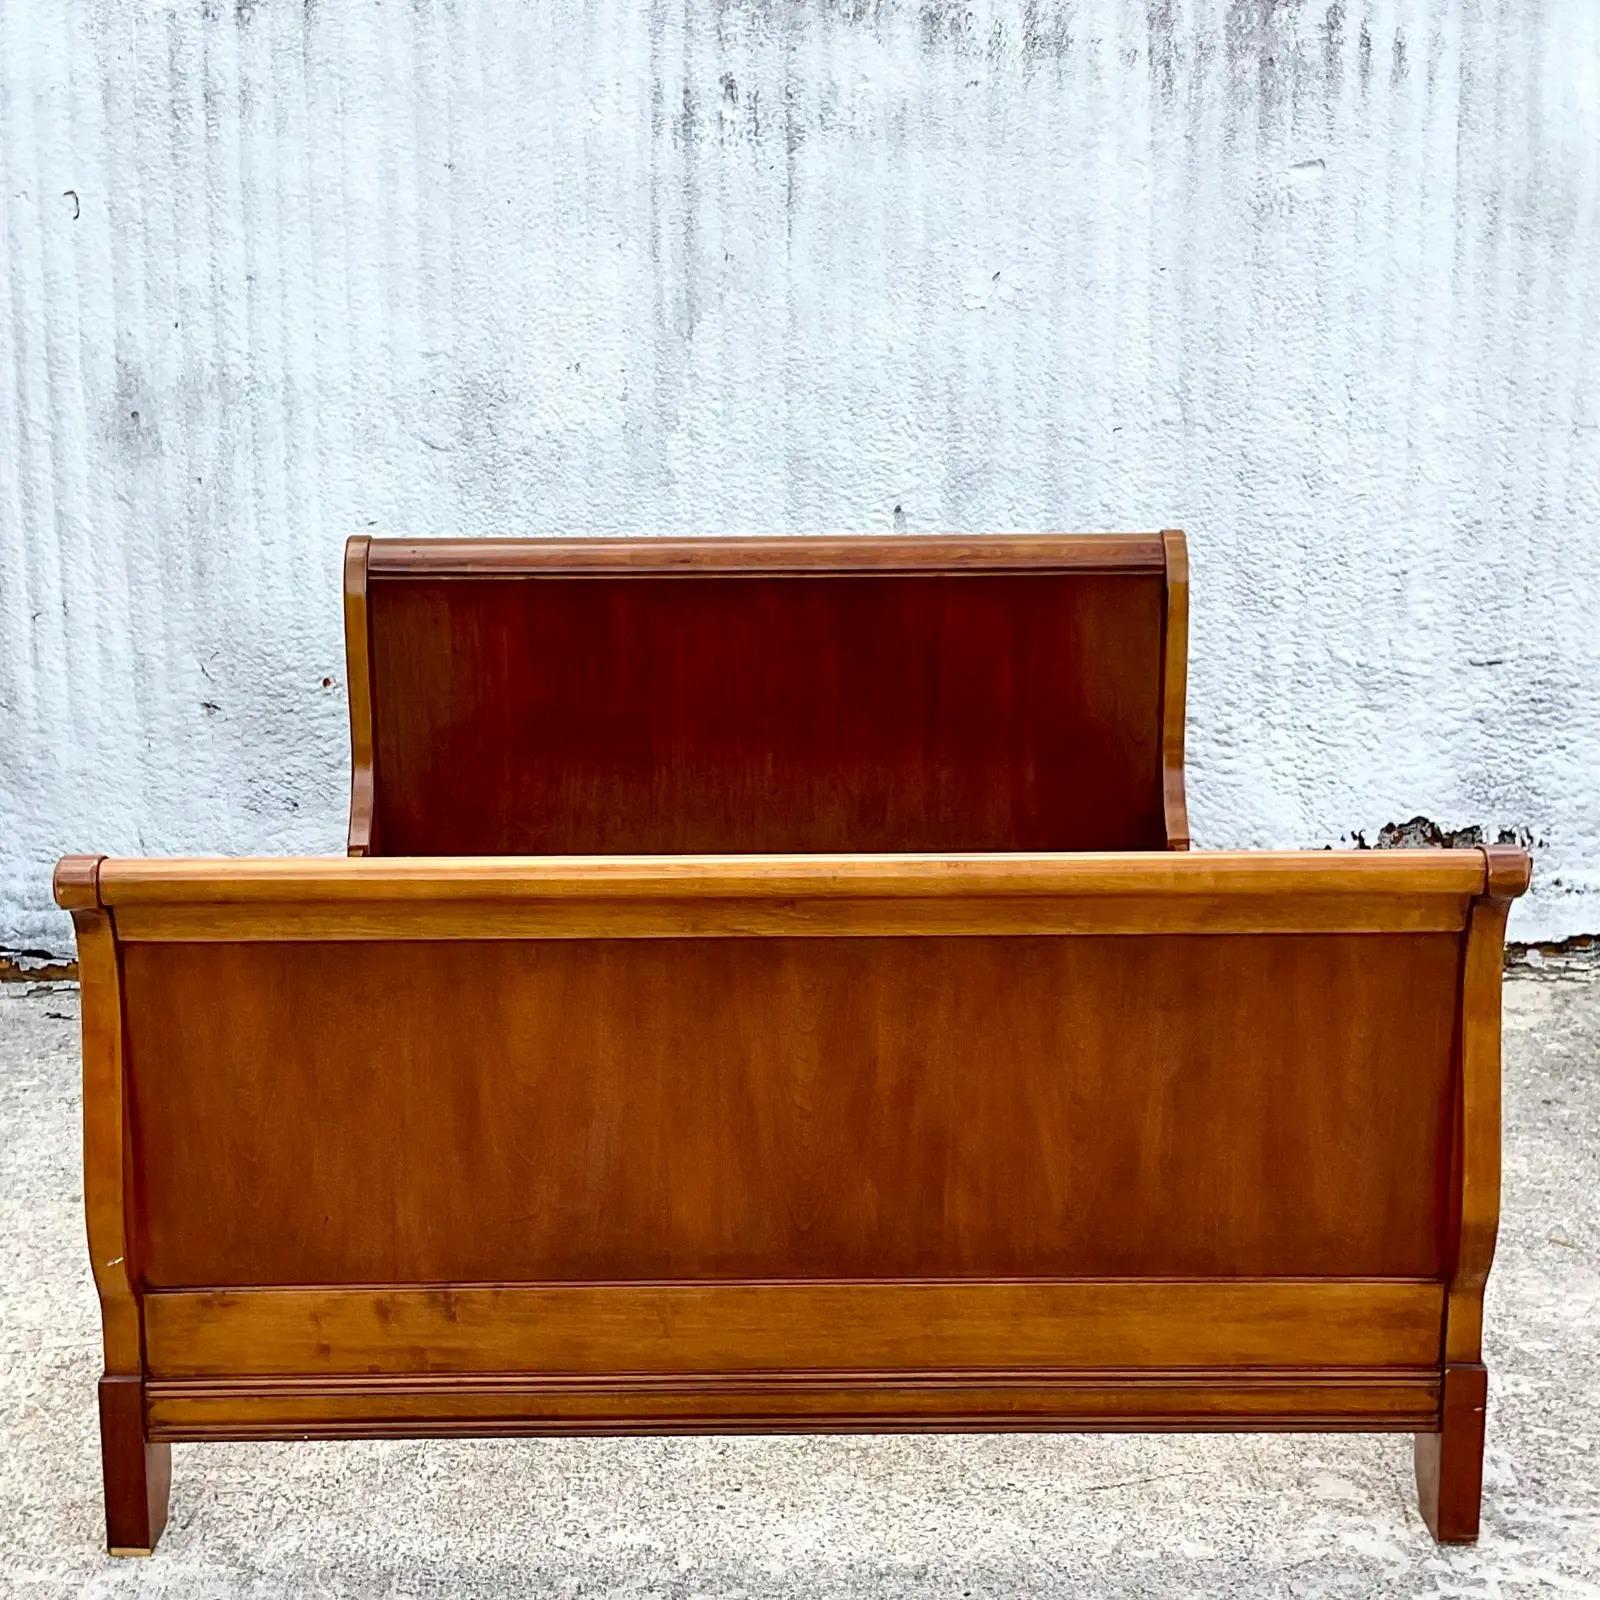 Gorgeous vintage Queen sleigh bed. Beautiful high sides and beautiful wood grain detail. Acquired from a Palm Beach estate.